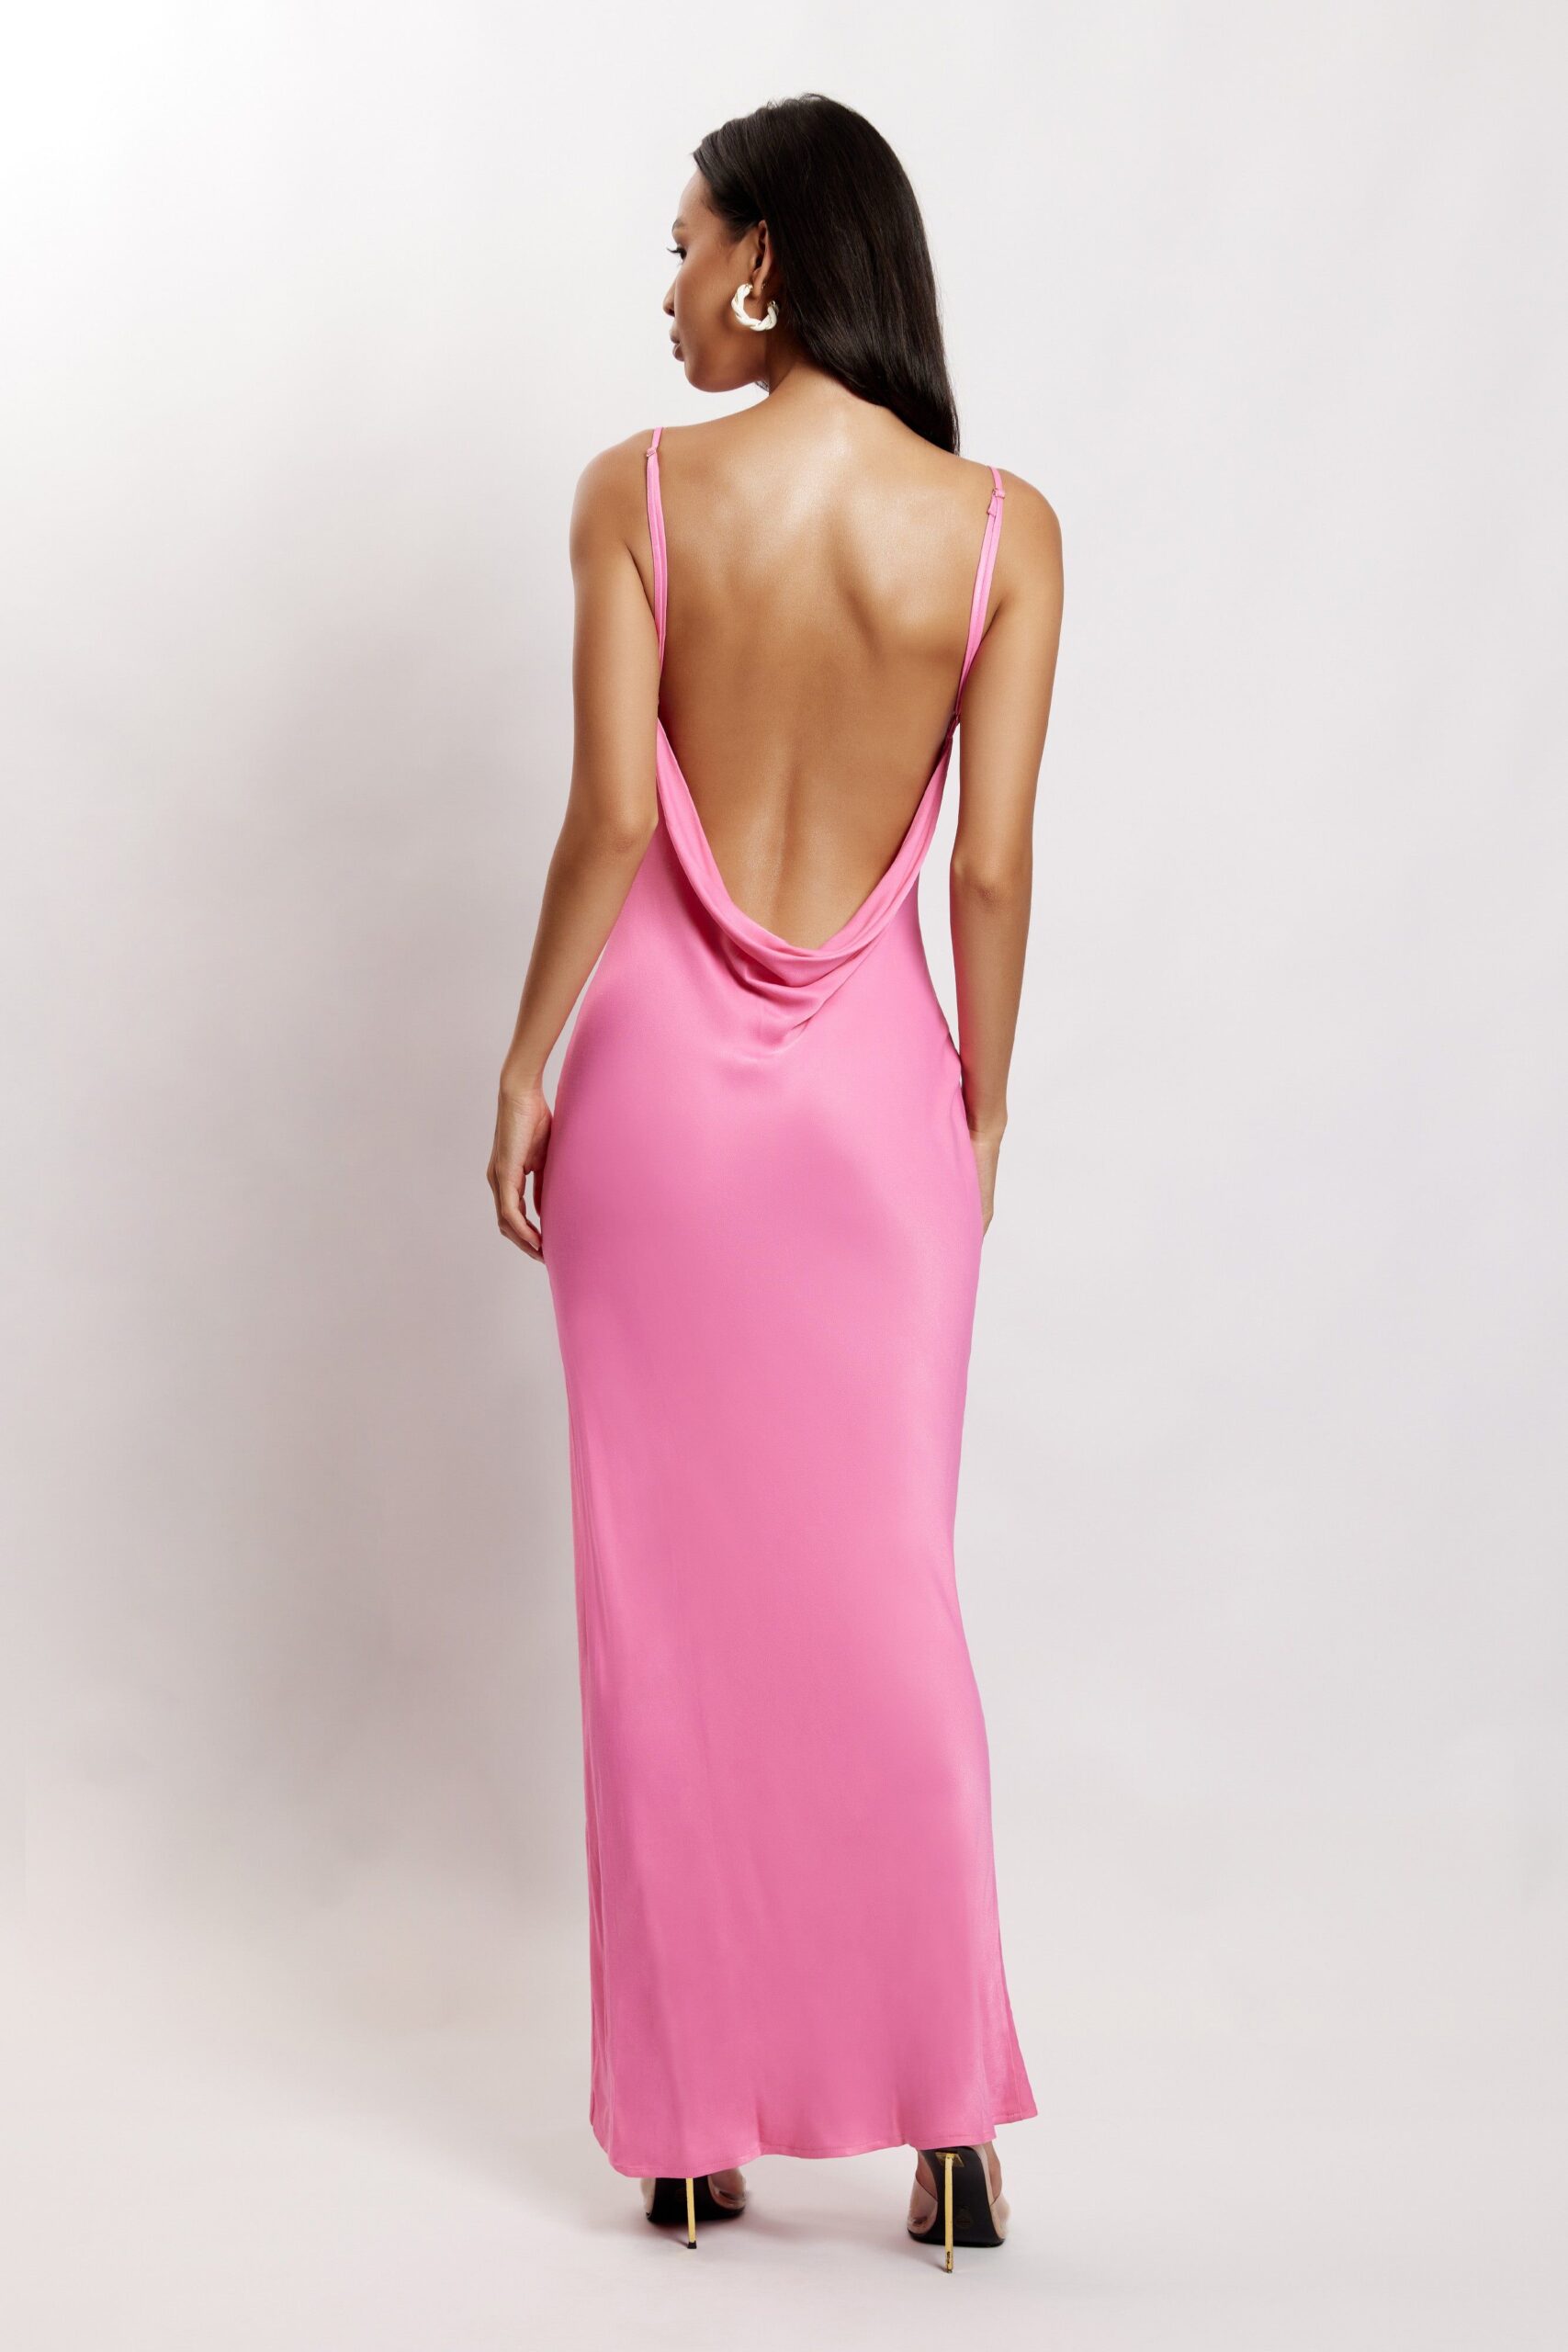 The Versatility of a Backless Maxi Dress